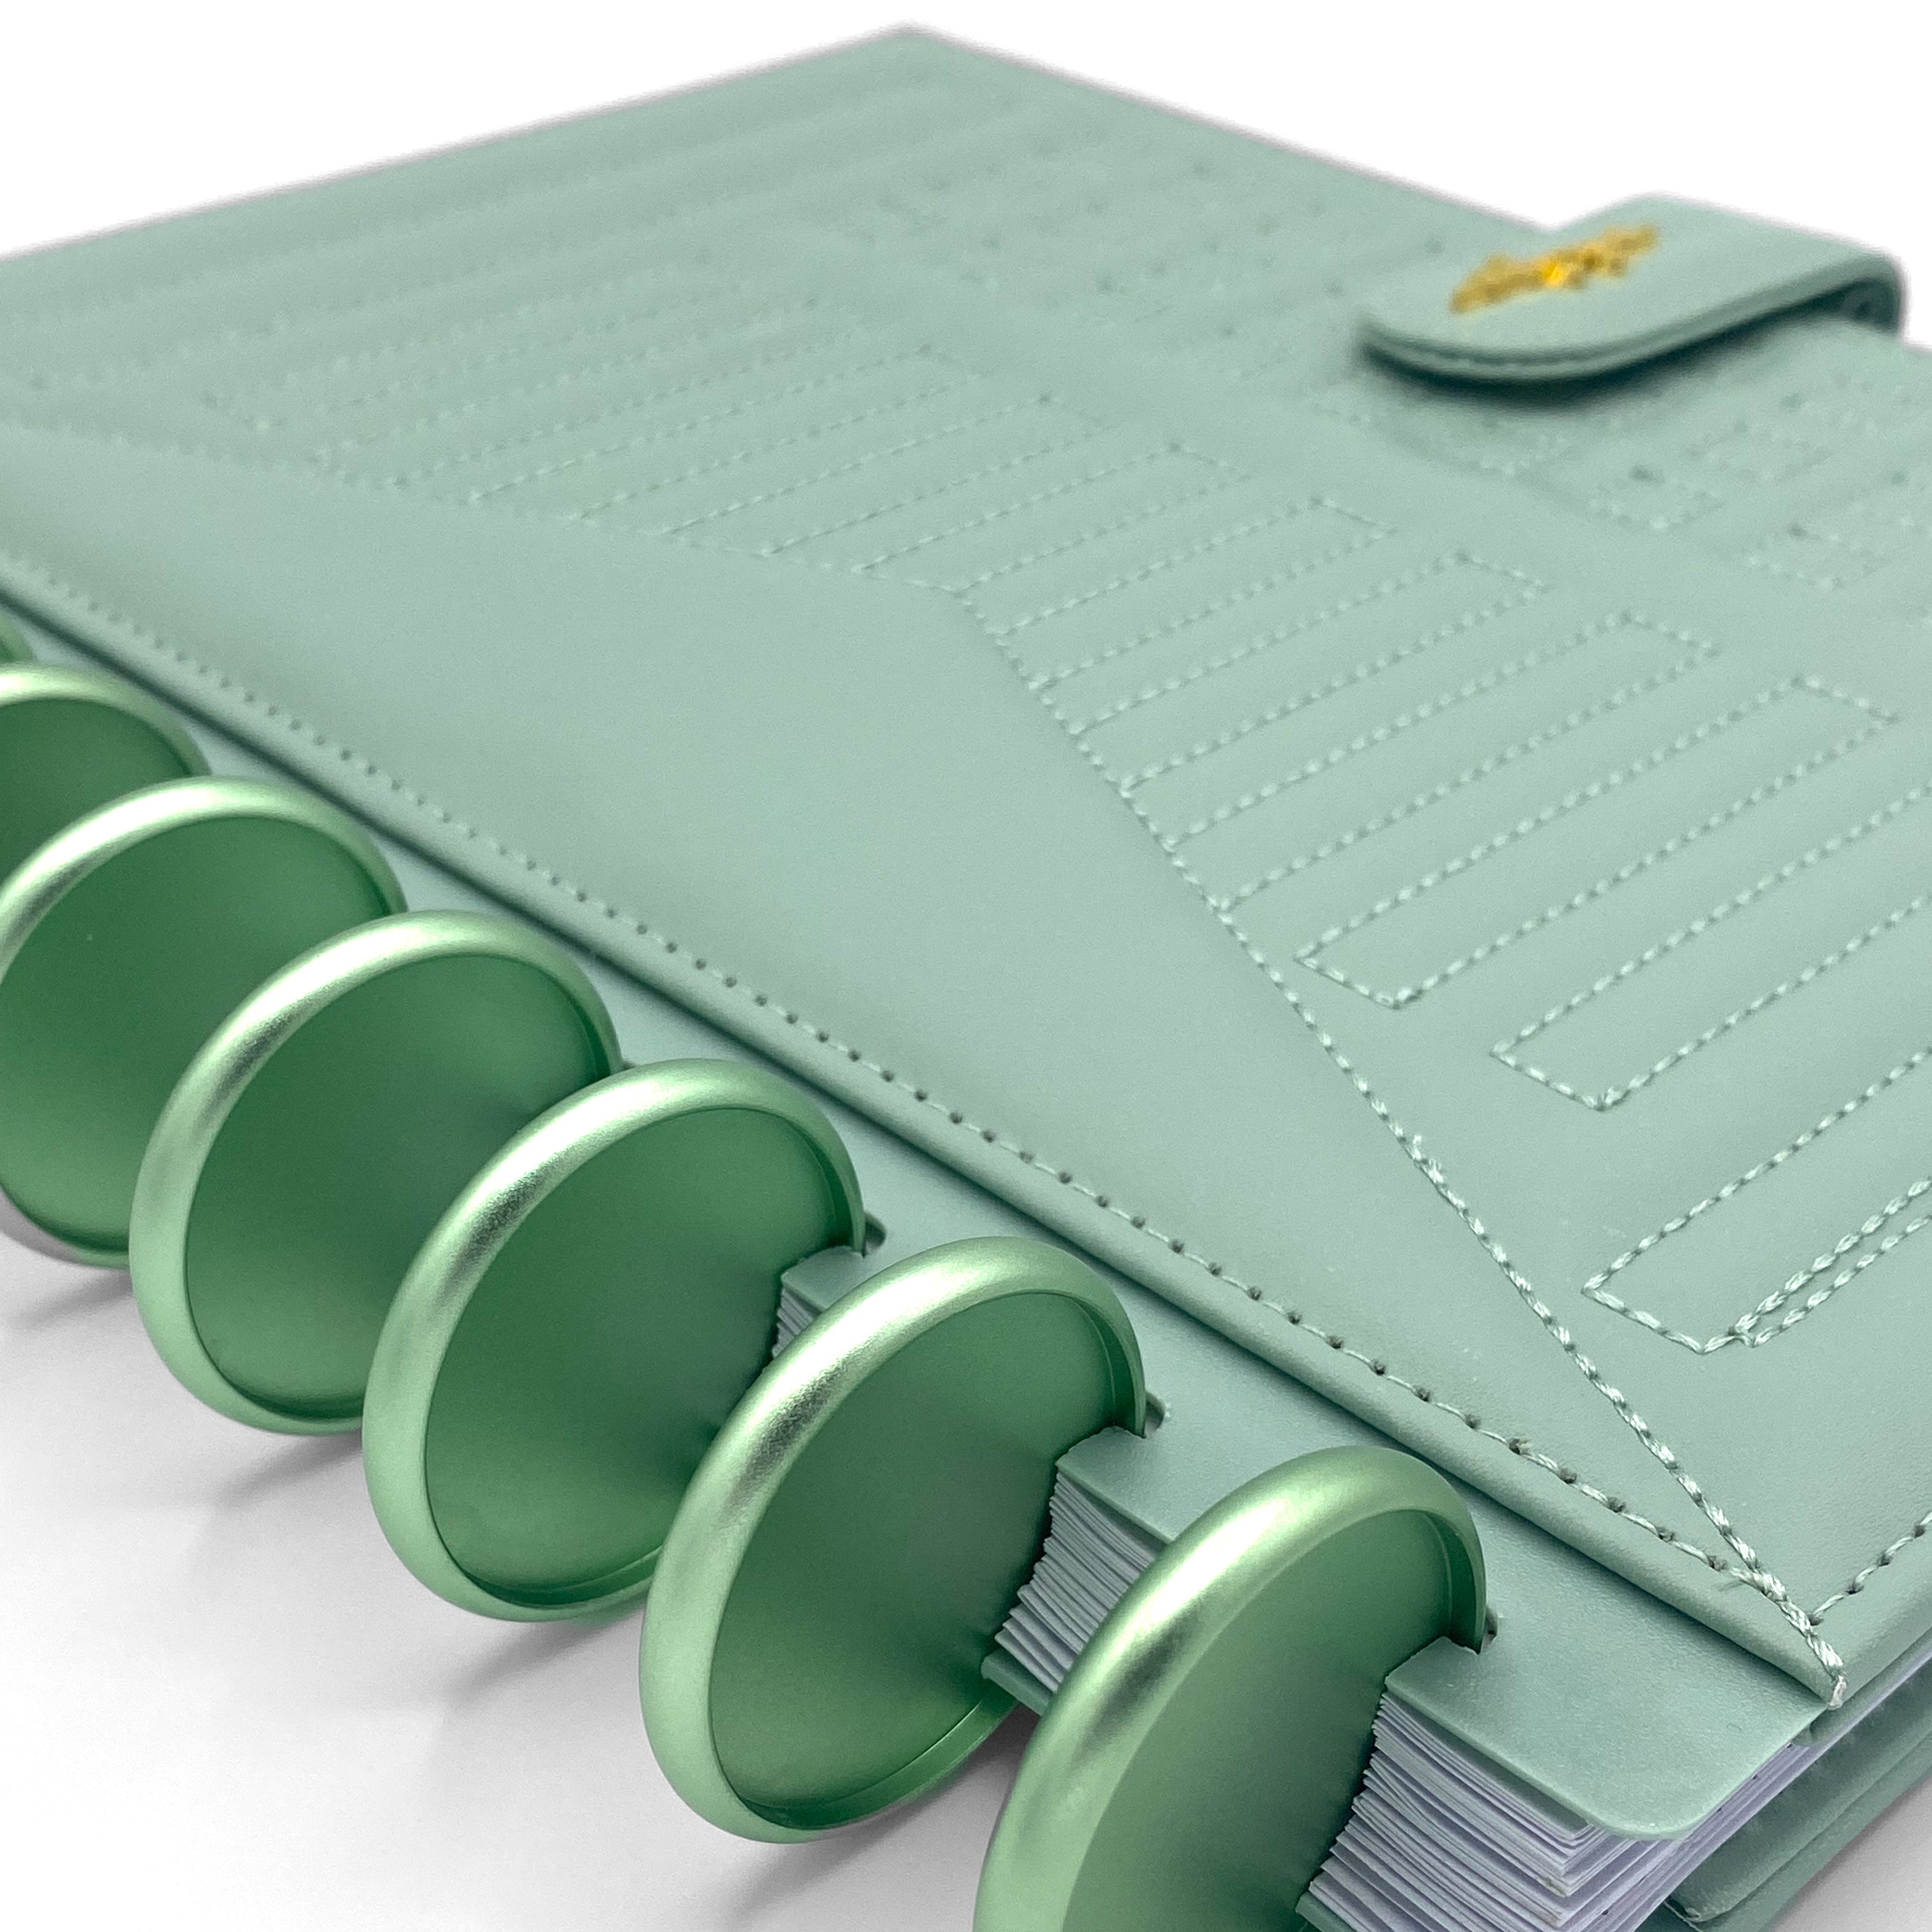 Side view of green faux leather planner with green discs